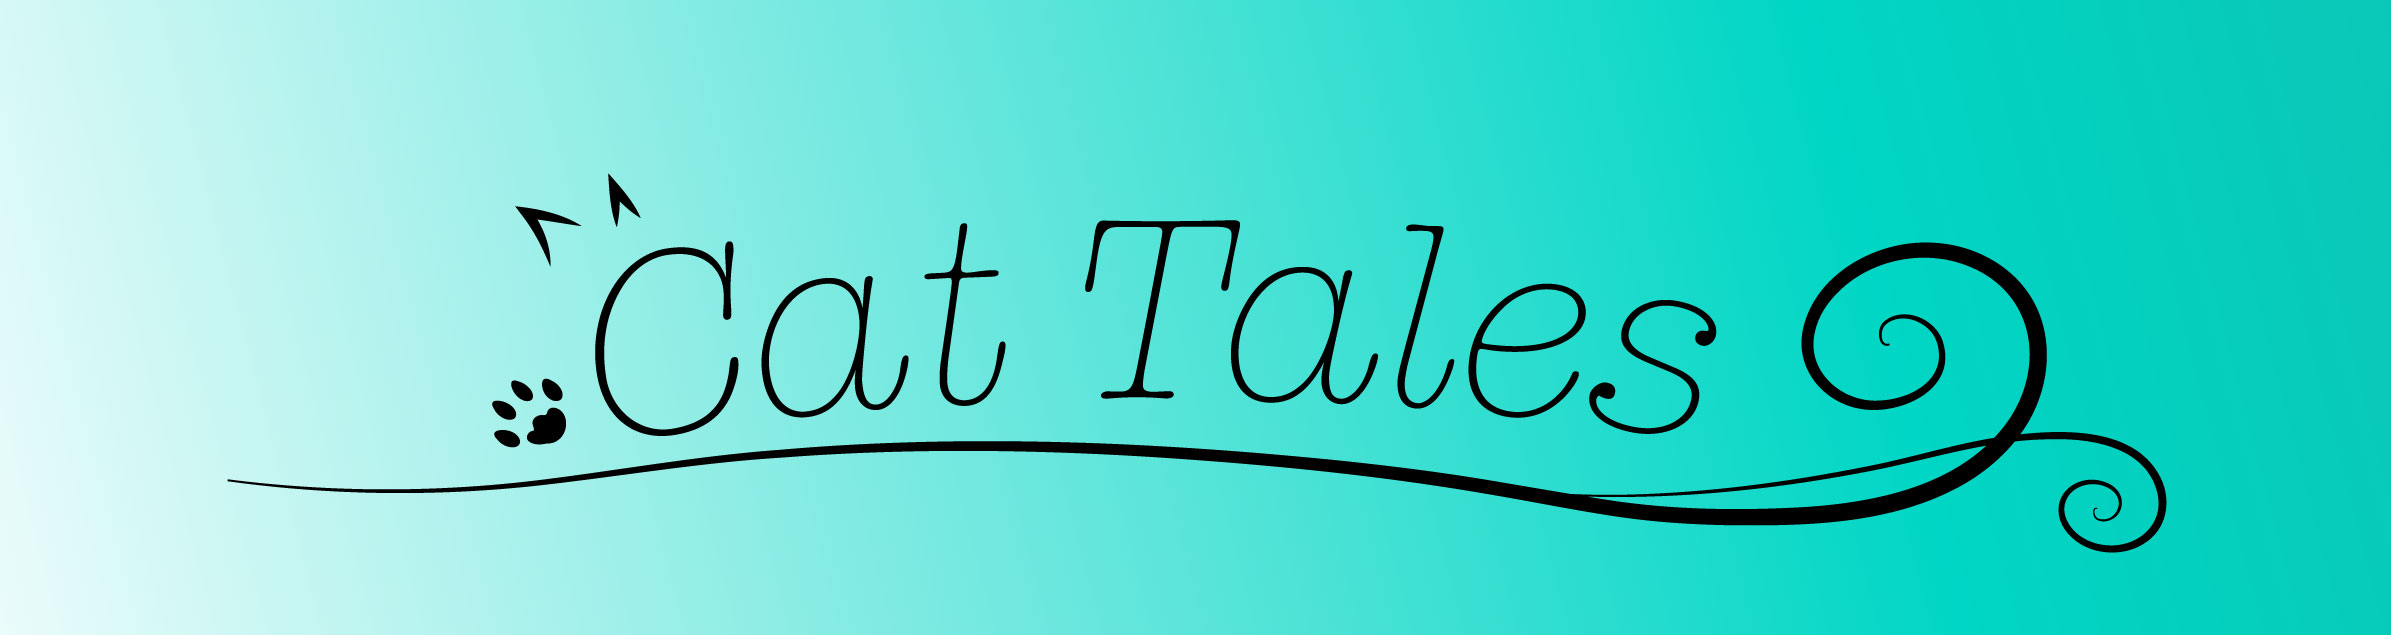 A banner that reads "Cat Tales" in an italic, clean typewriter font. There are little triangles above the C, that look like ears, and a little paw print in black by the bottom of the C. There are two long swirls entwined underneath the words. There is a gradient background that goes from white to teal.